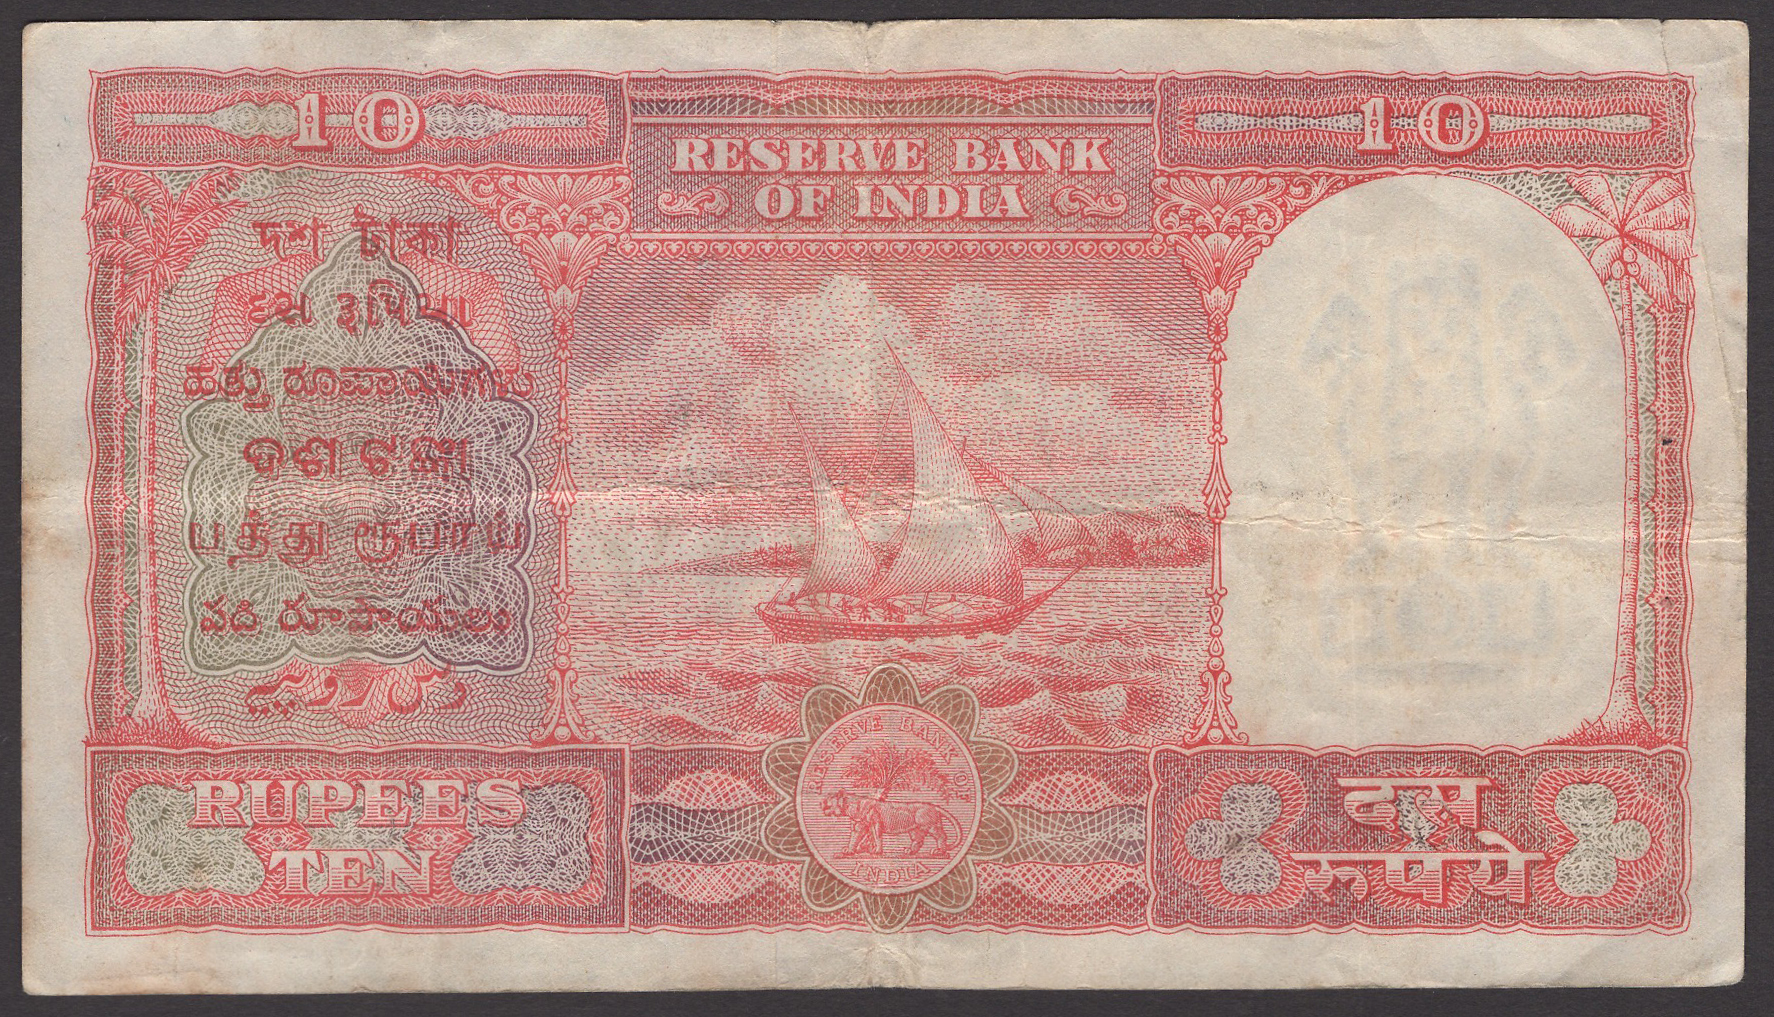 Reserve Bank of India, Persian Gulf Issue, 10 Rupees, ND (1957-62), serial number Z/14... - Image 2 of 2